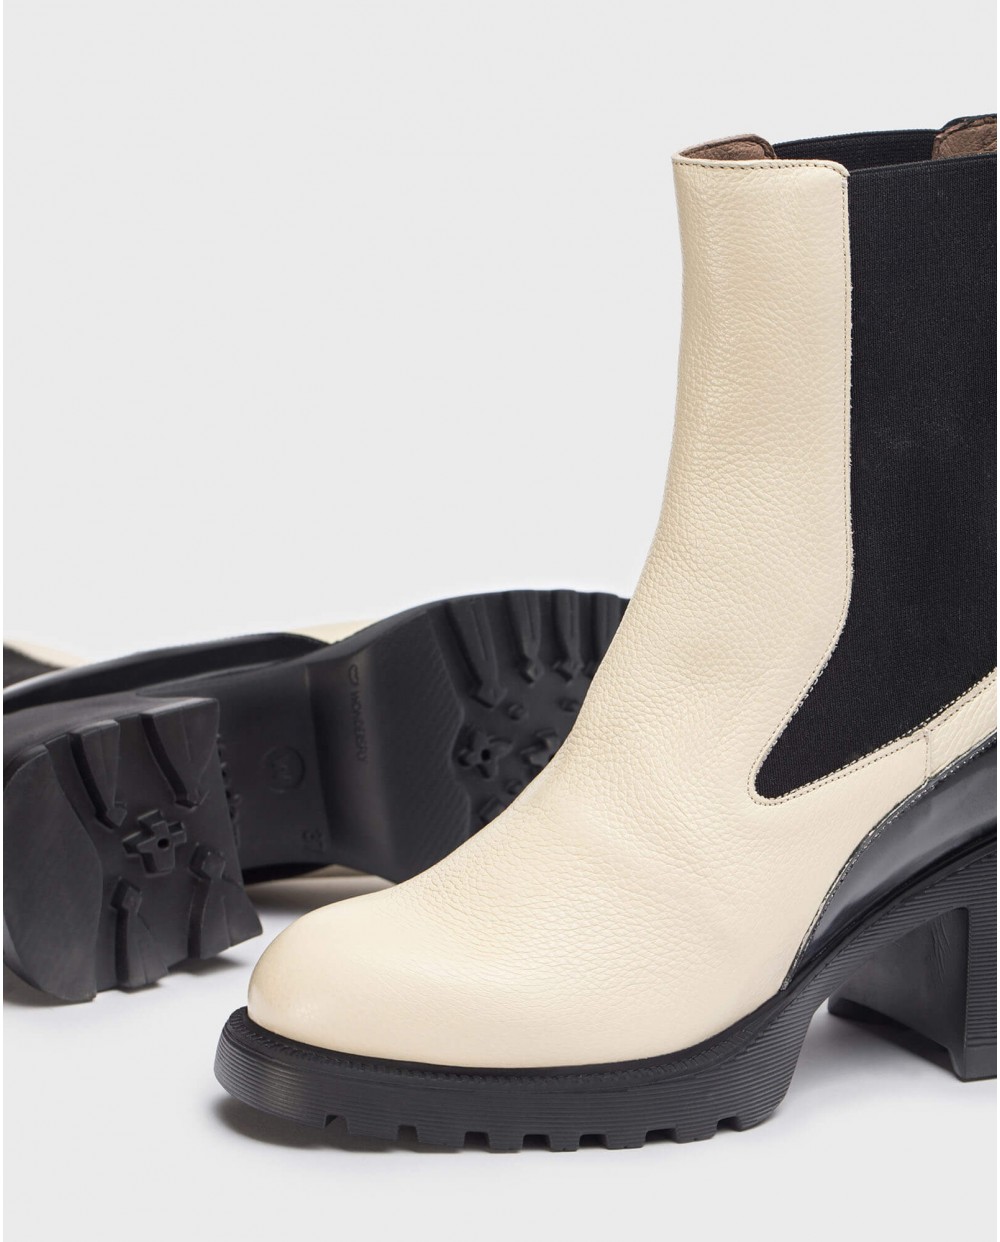 Wonders-Ankle Boots-Black ORAN ankle boot